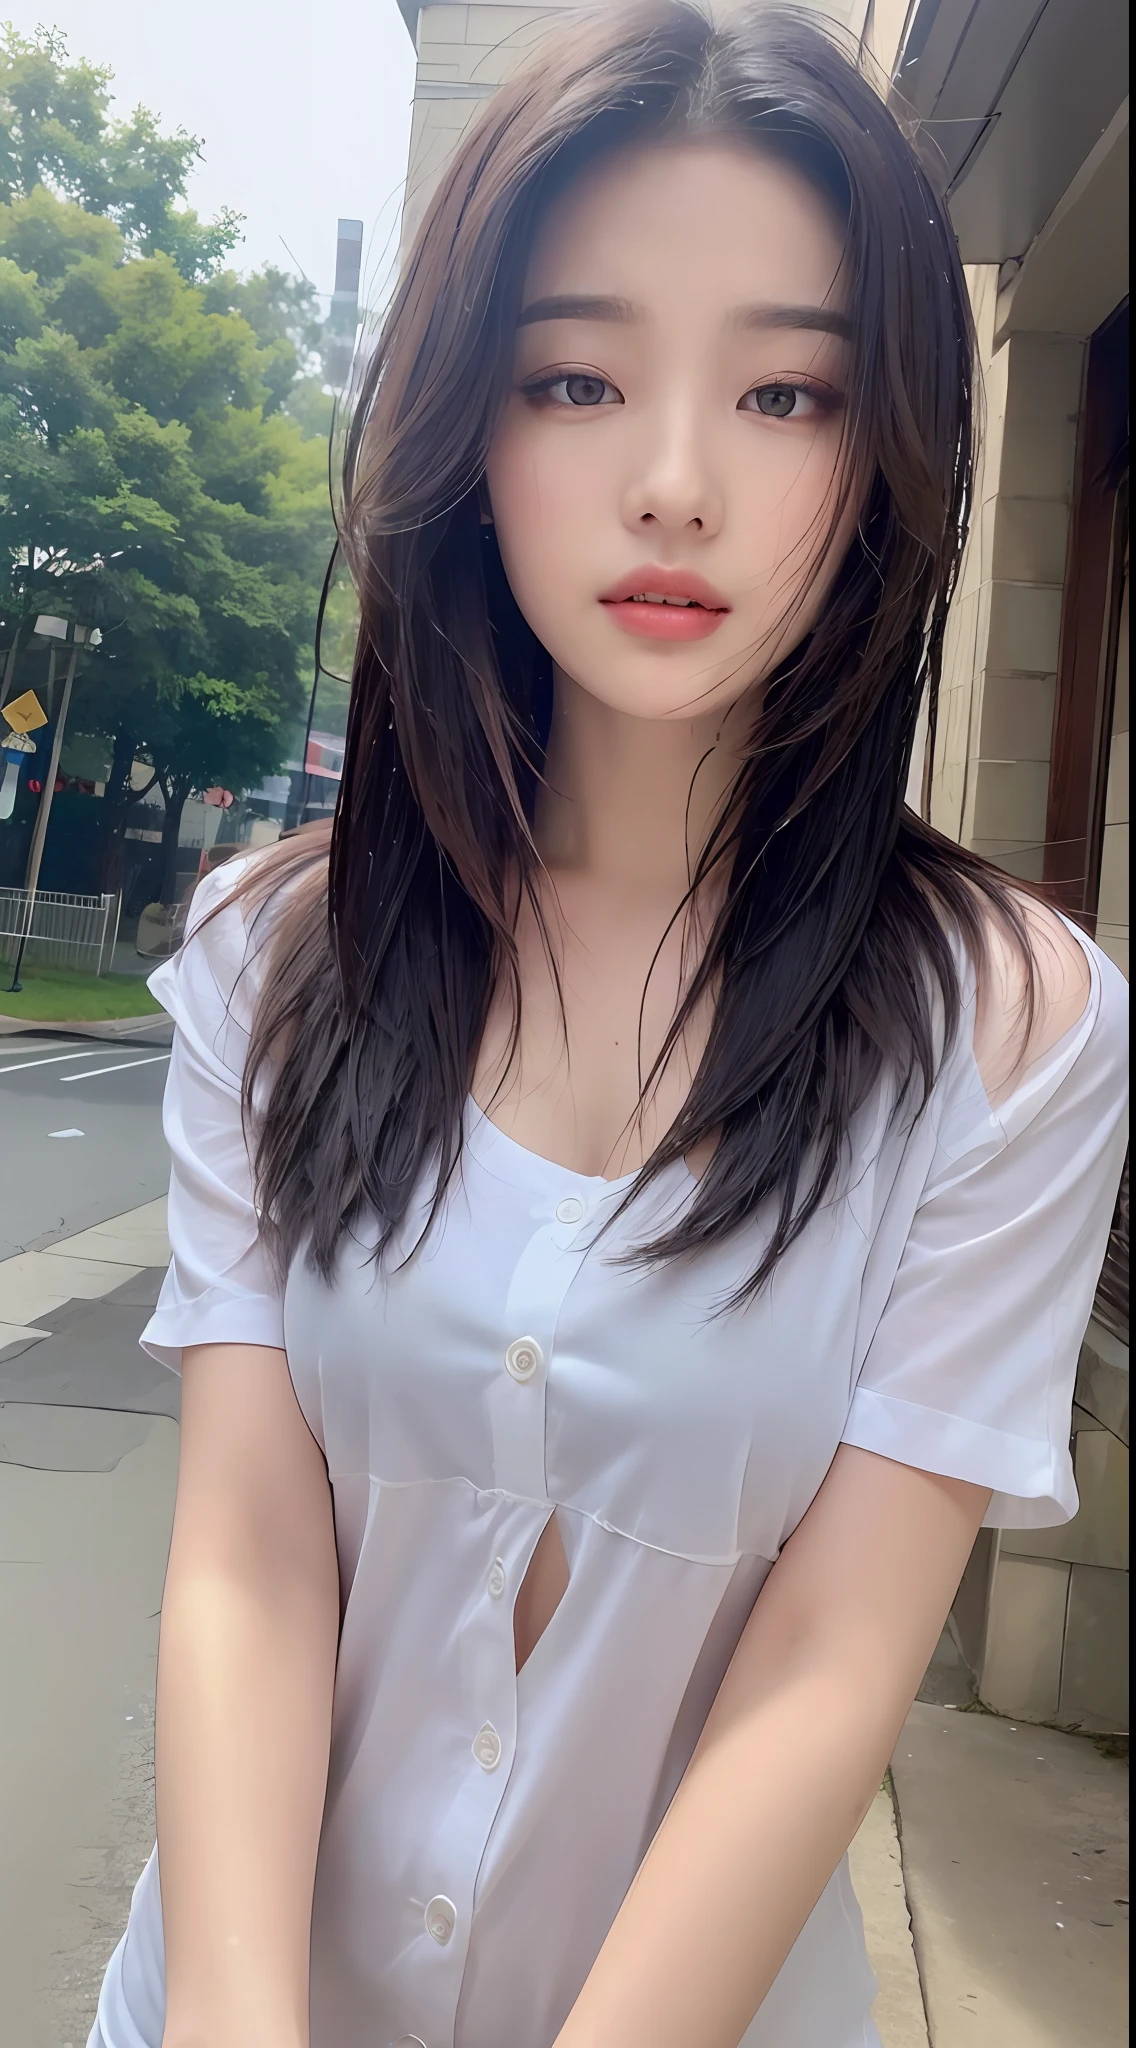 ((Best Quality, 8K, Masterpiece: 1.3)), Sharp: 1.2, Perfect Body Beauty: 1.4, Slim Abs: 1.2, ((Layered Hairstyle, Big Breasts: 1.2)), (Wet White Button Short Sleeve Shirt: 1.1), (Rain, Street: 1.2), Wet: 1.5, Highly detailed face and skin texture, Fine eyes, double eyelids, looking at the camera